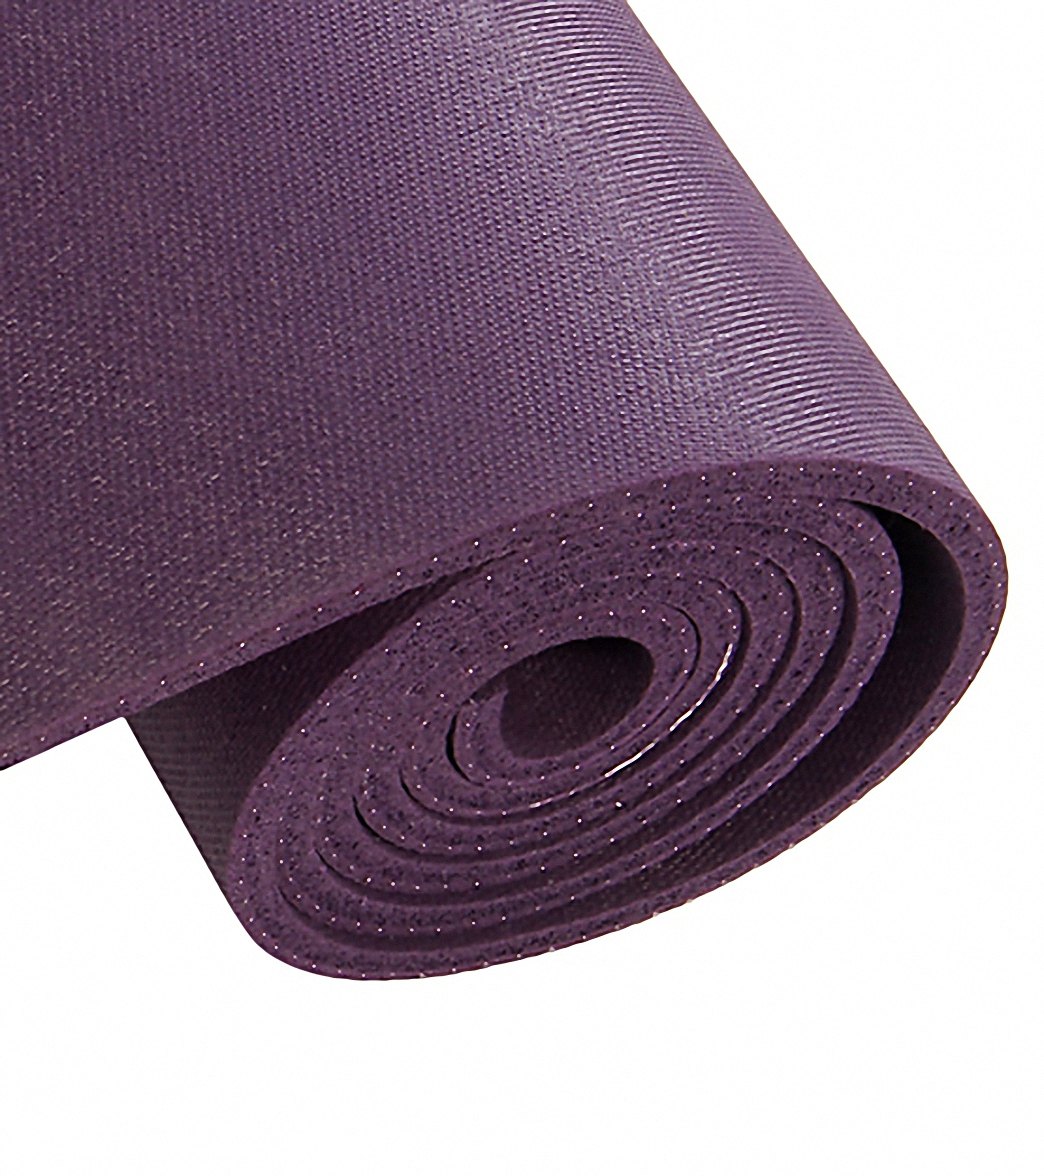 Extra Thick Yoga Mat, 68 or 74, Non-toxic rubber, plants a tree